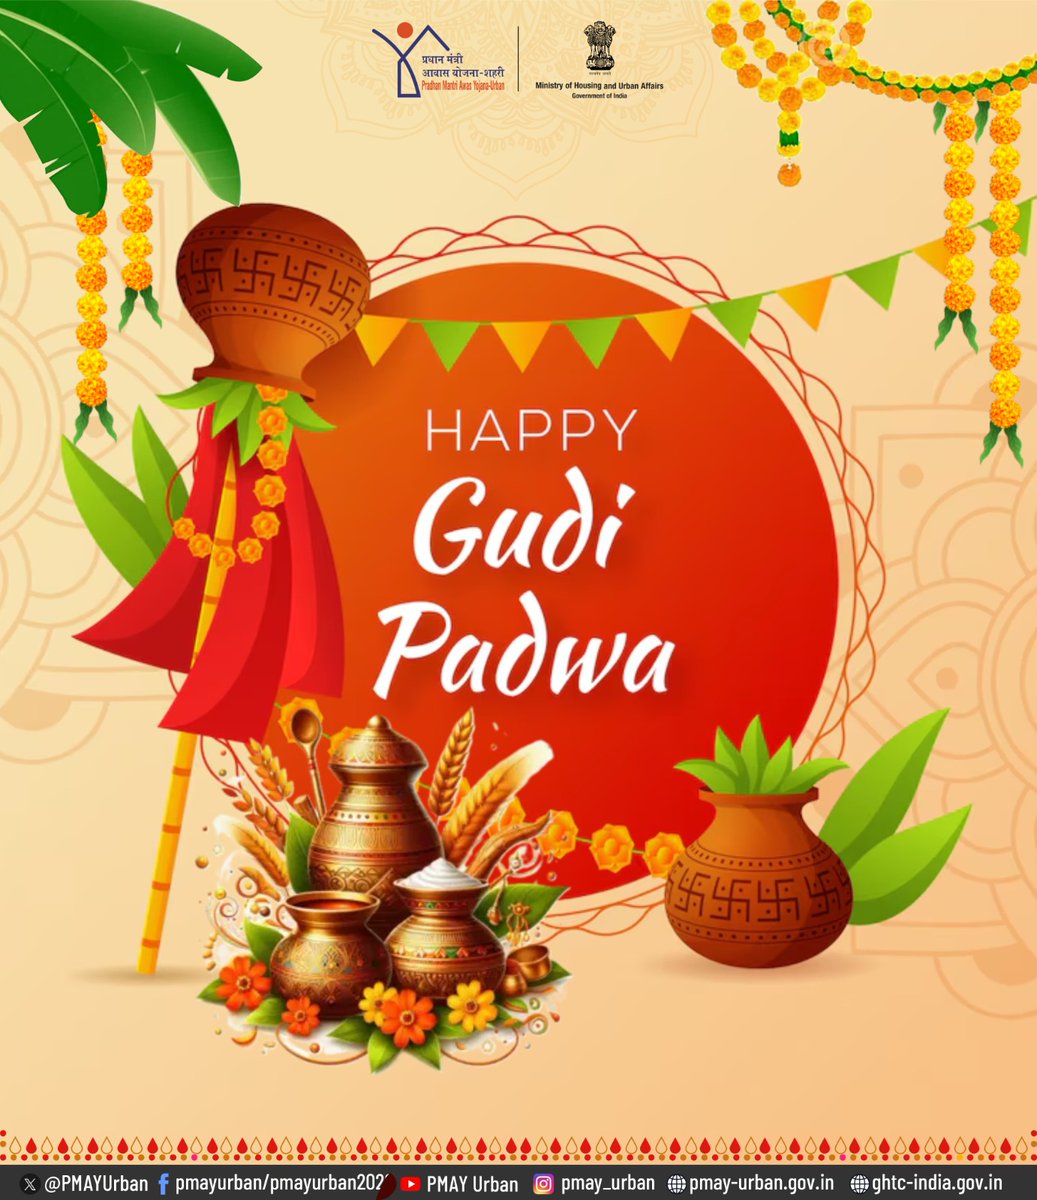 Happy Gudi Padwa! On this auspicious occasion, we wish happiness, peace & prosperity for you & your family. #GudiPadwa #HappyGudiPadwa #GudiPadwa2024